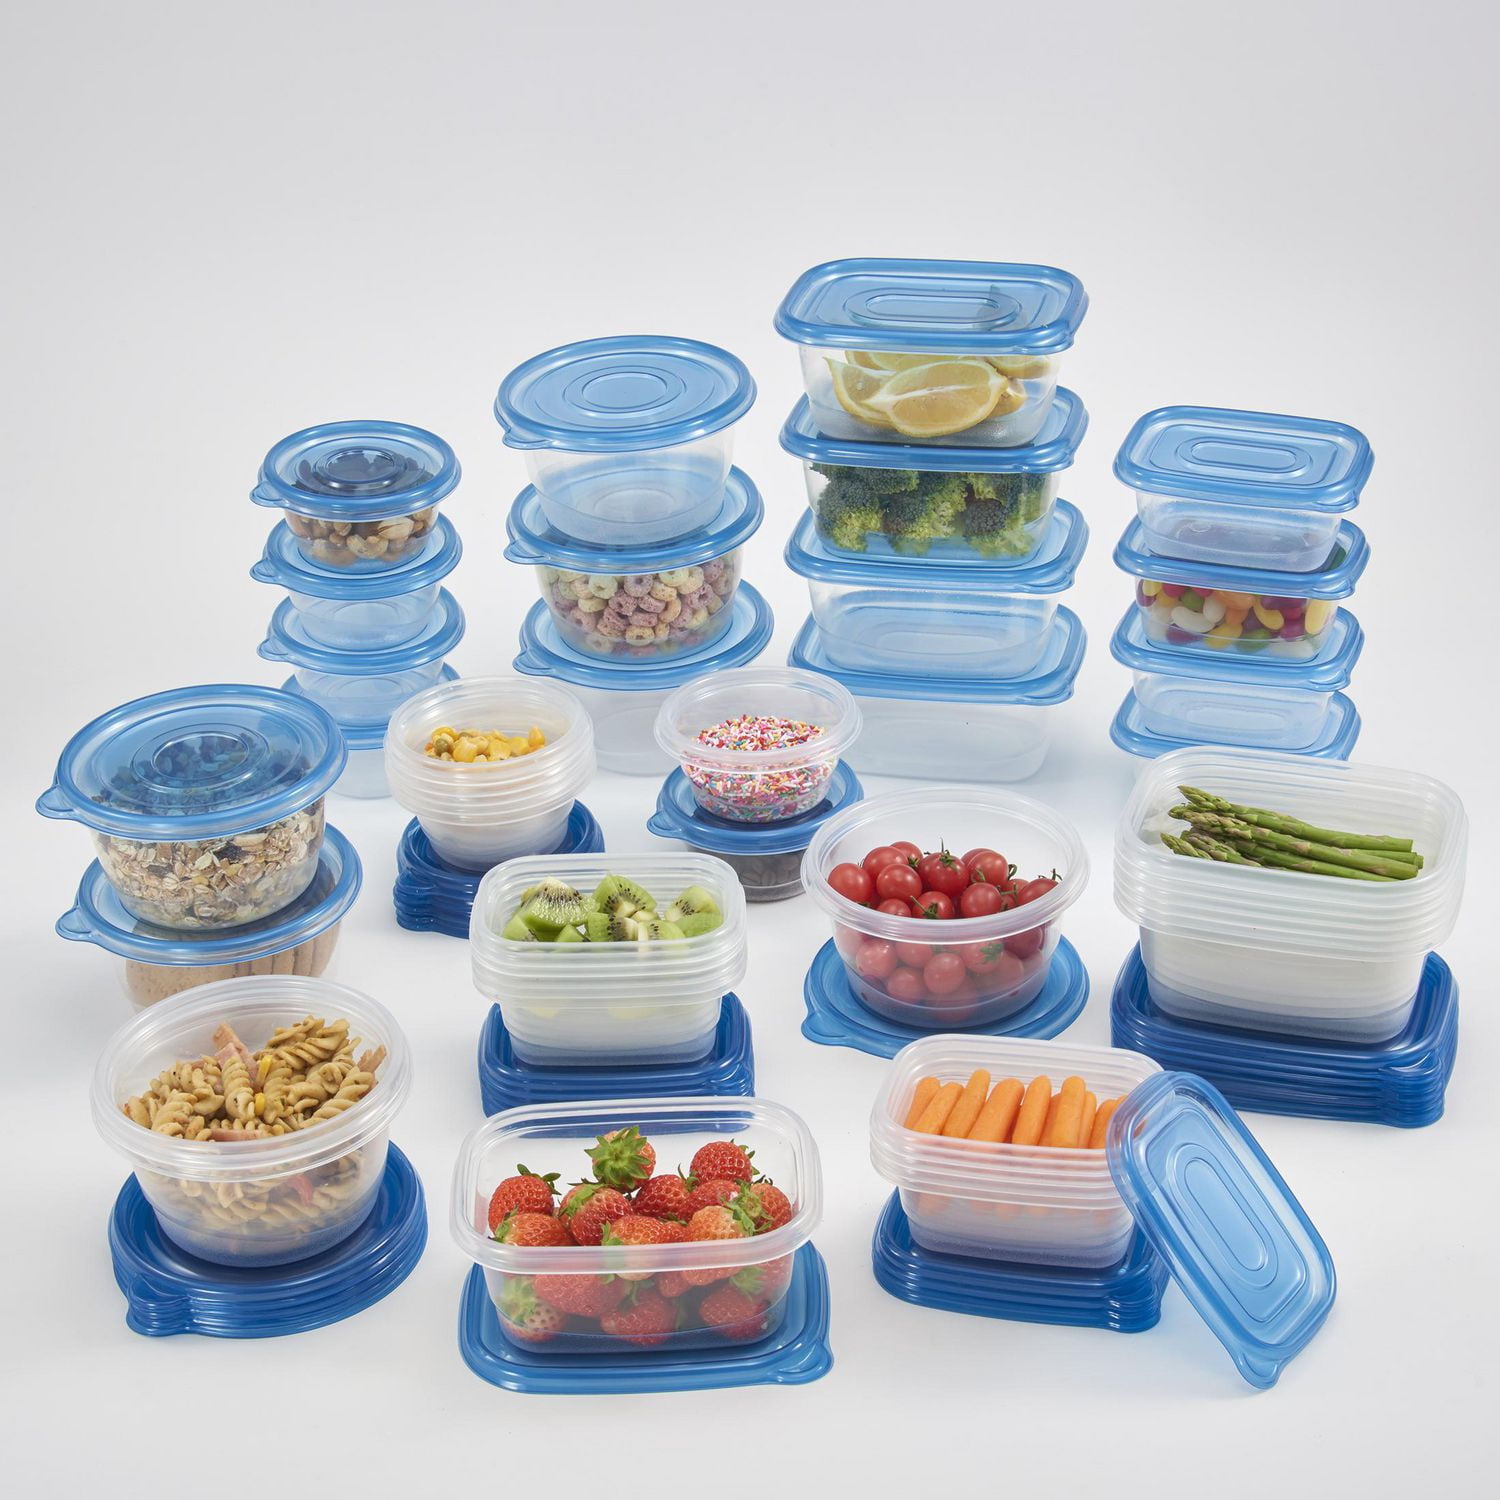 Mainstays 92PC Food Storage Containe, 92PC Food Storage Container